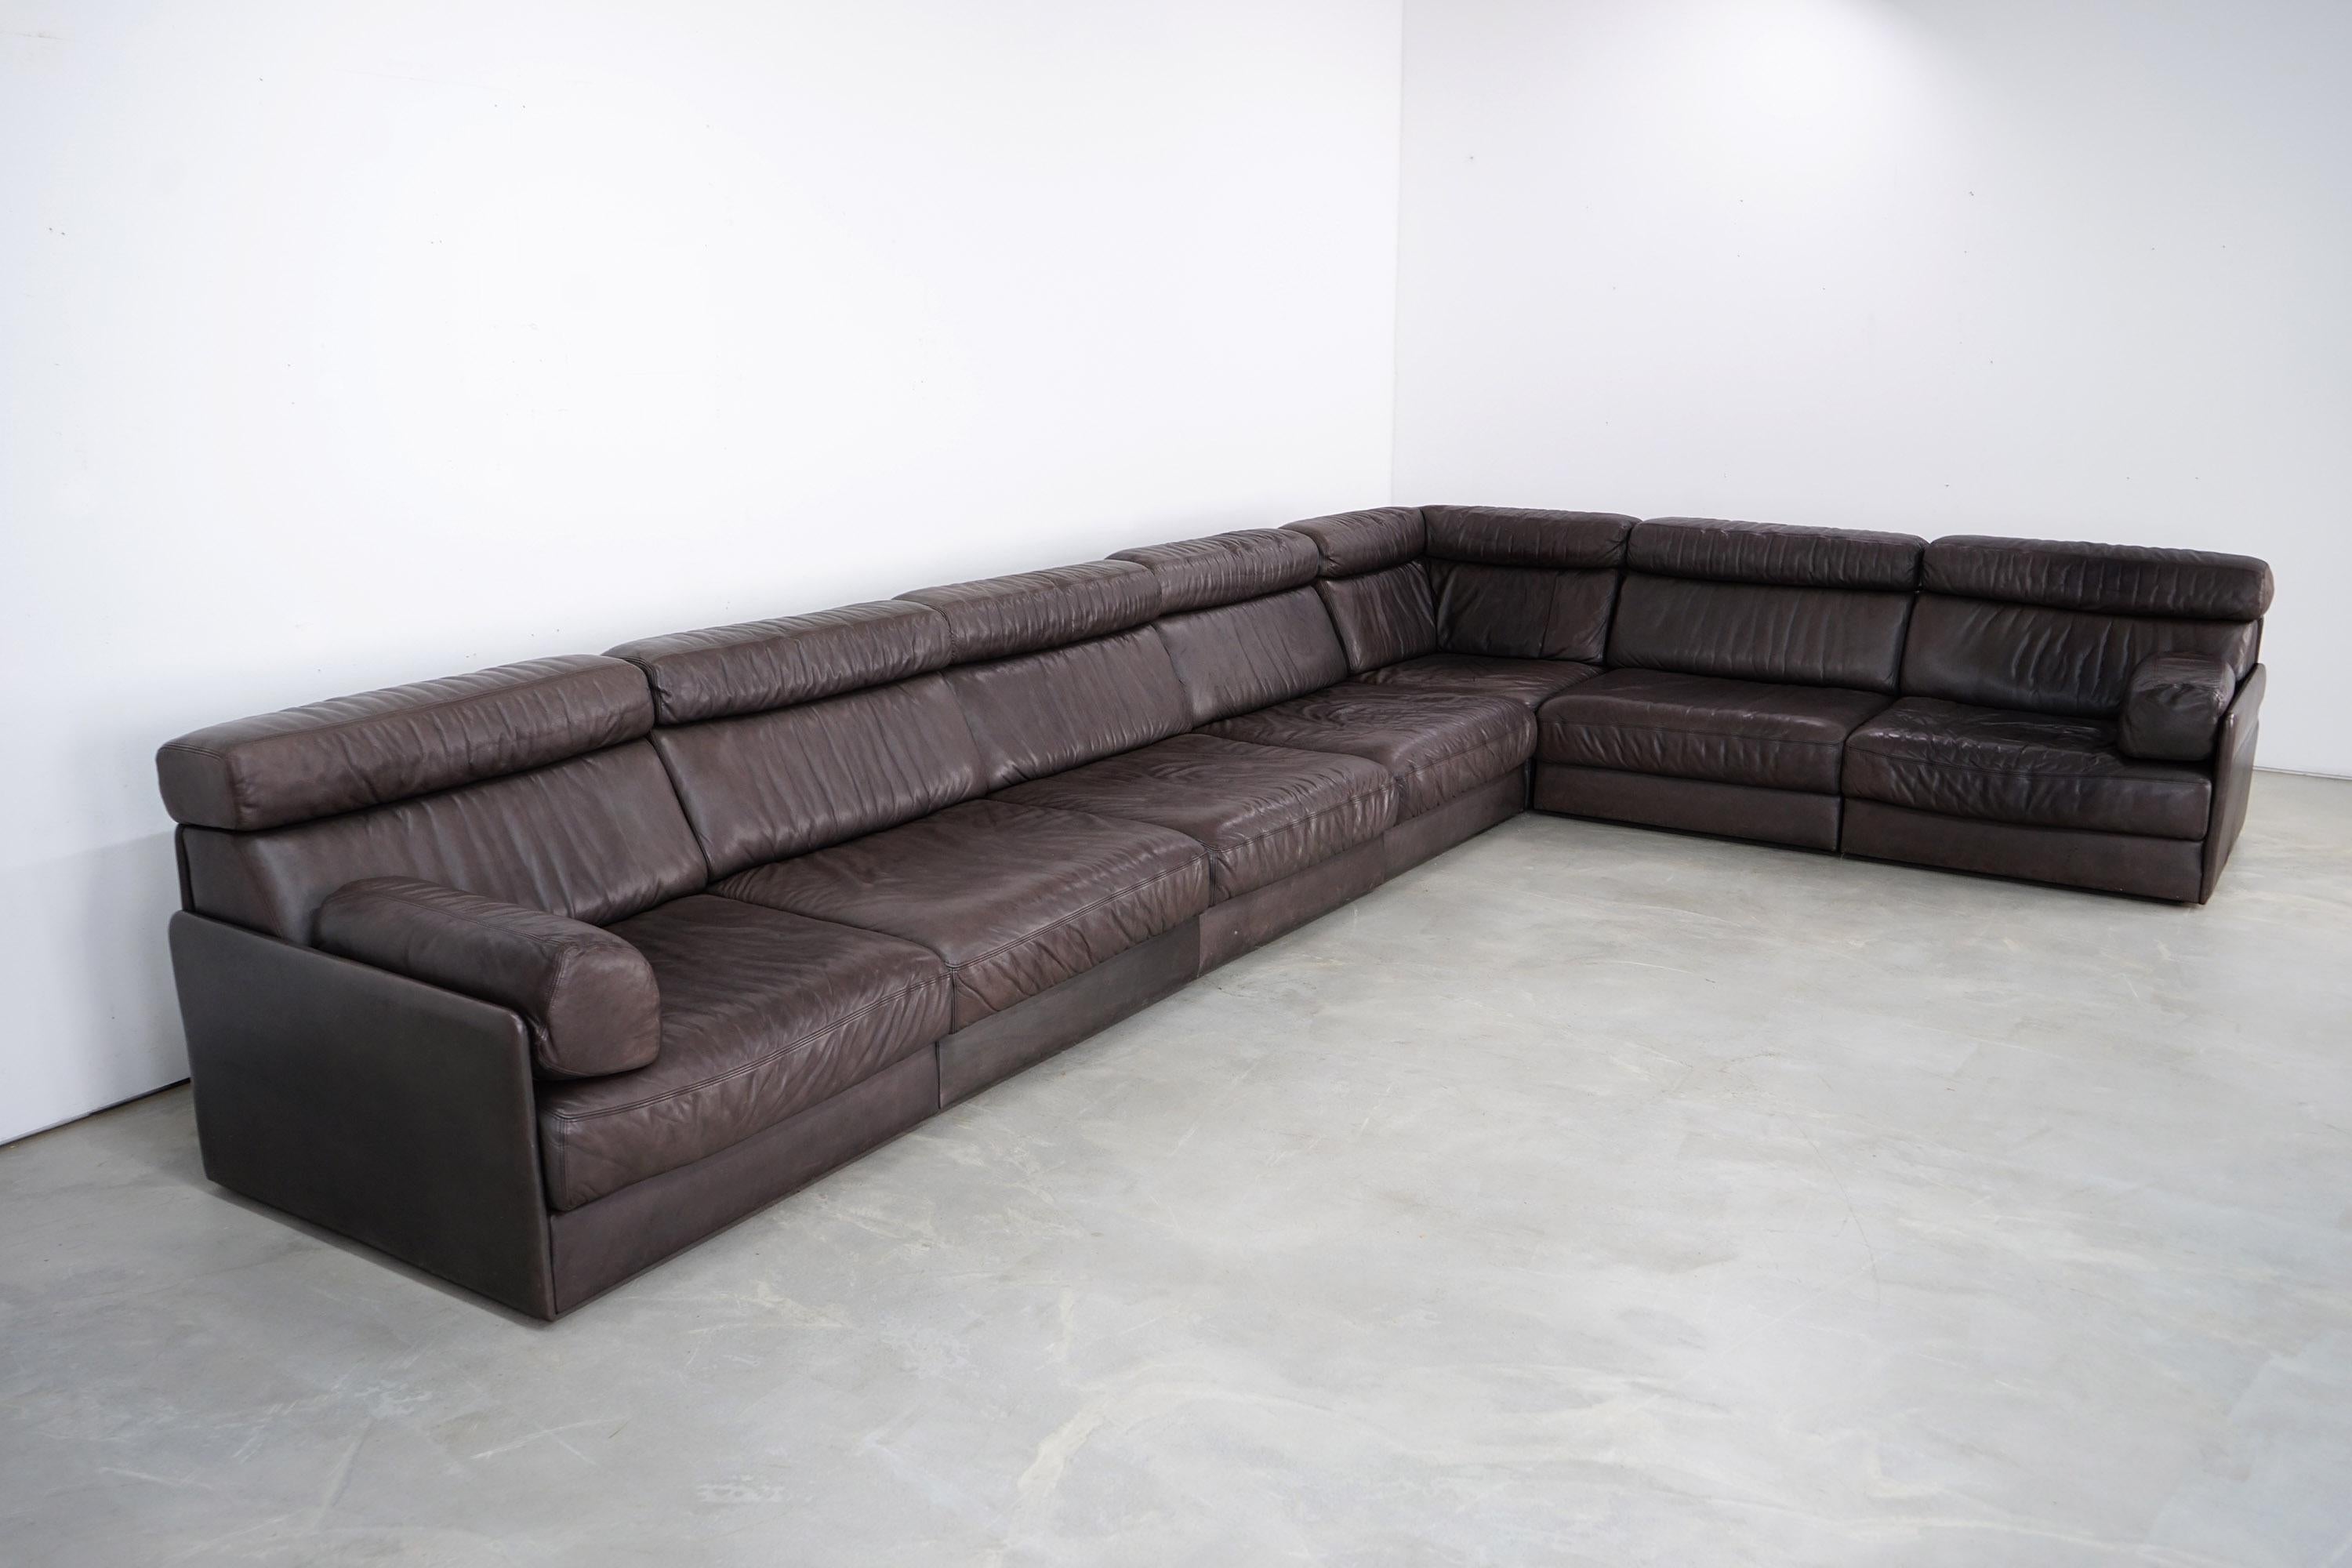 Swiss Desede DS-76 Brown Leather Sofa, Daybed, Seven Units